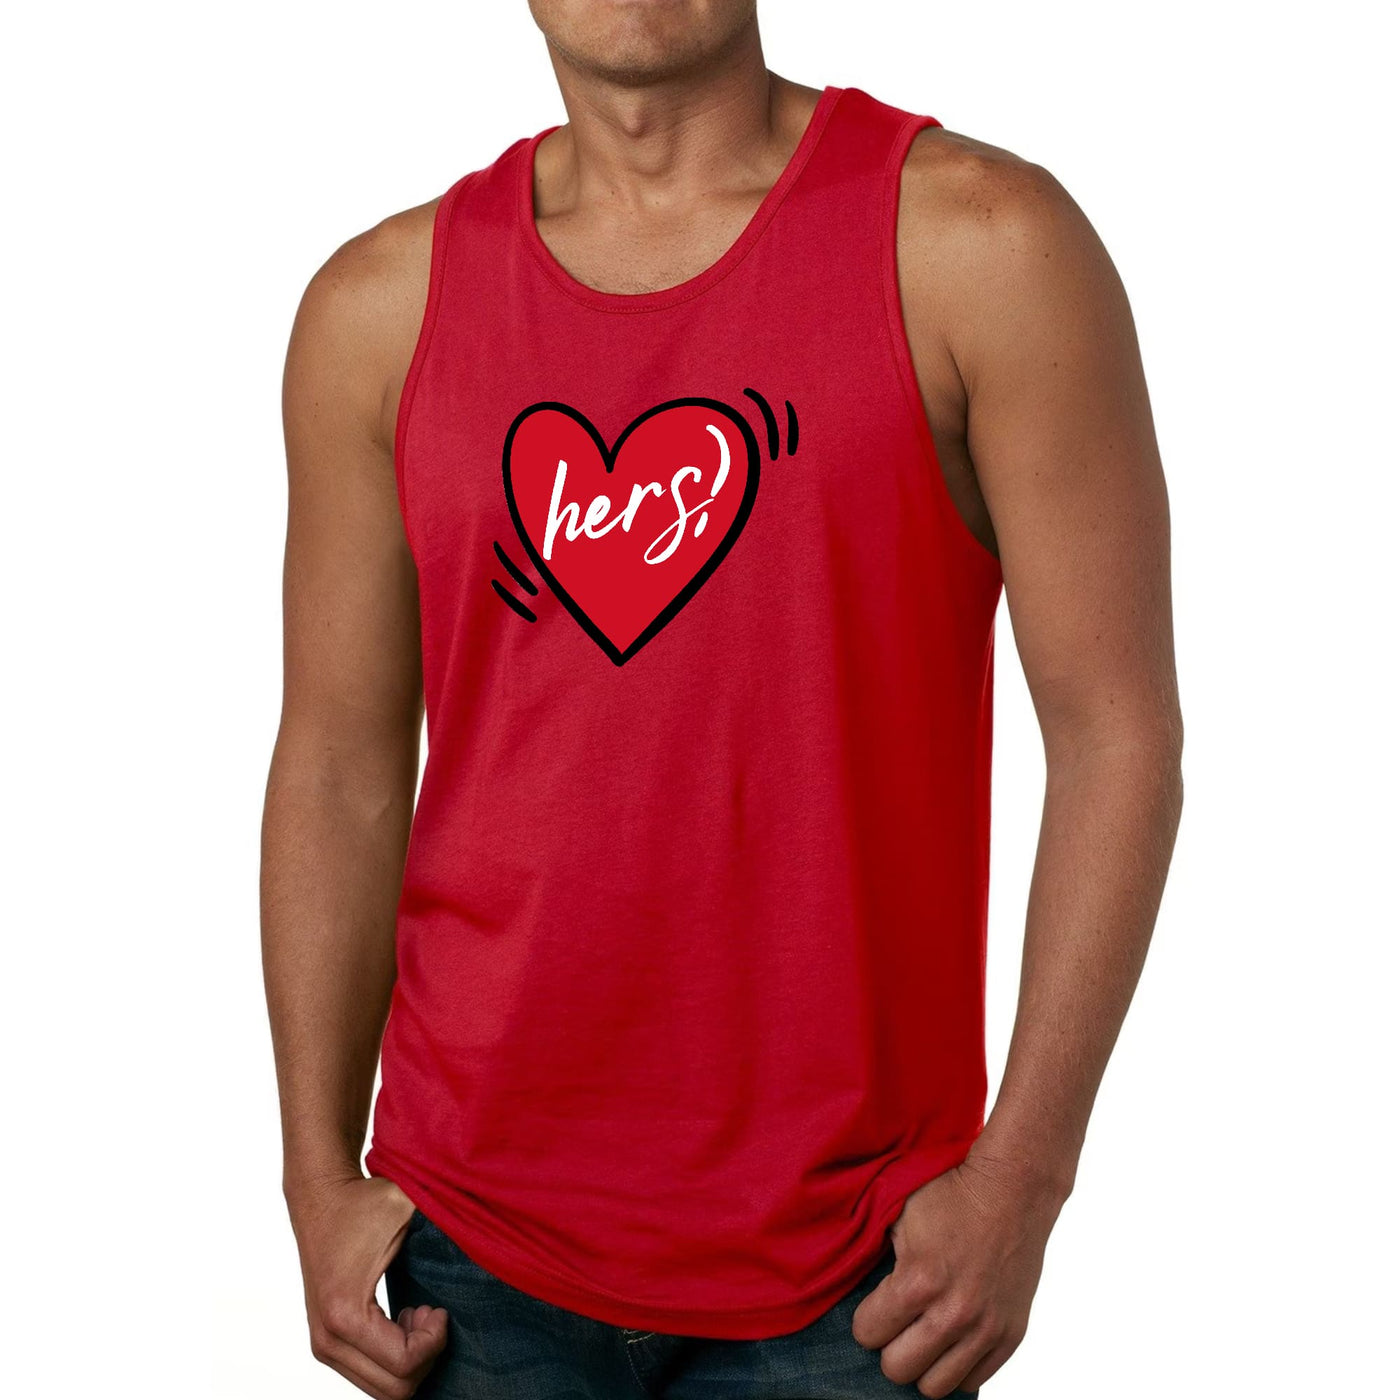 Mens Fitness Tank Top Graphic T-shirt Say It Soul Her Heart Couples - Mens